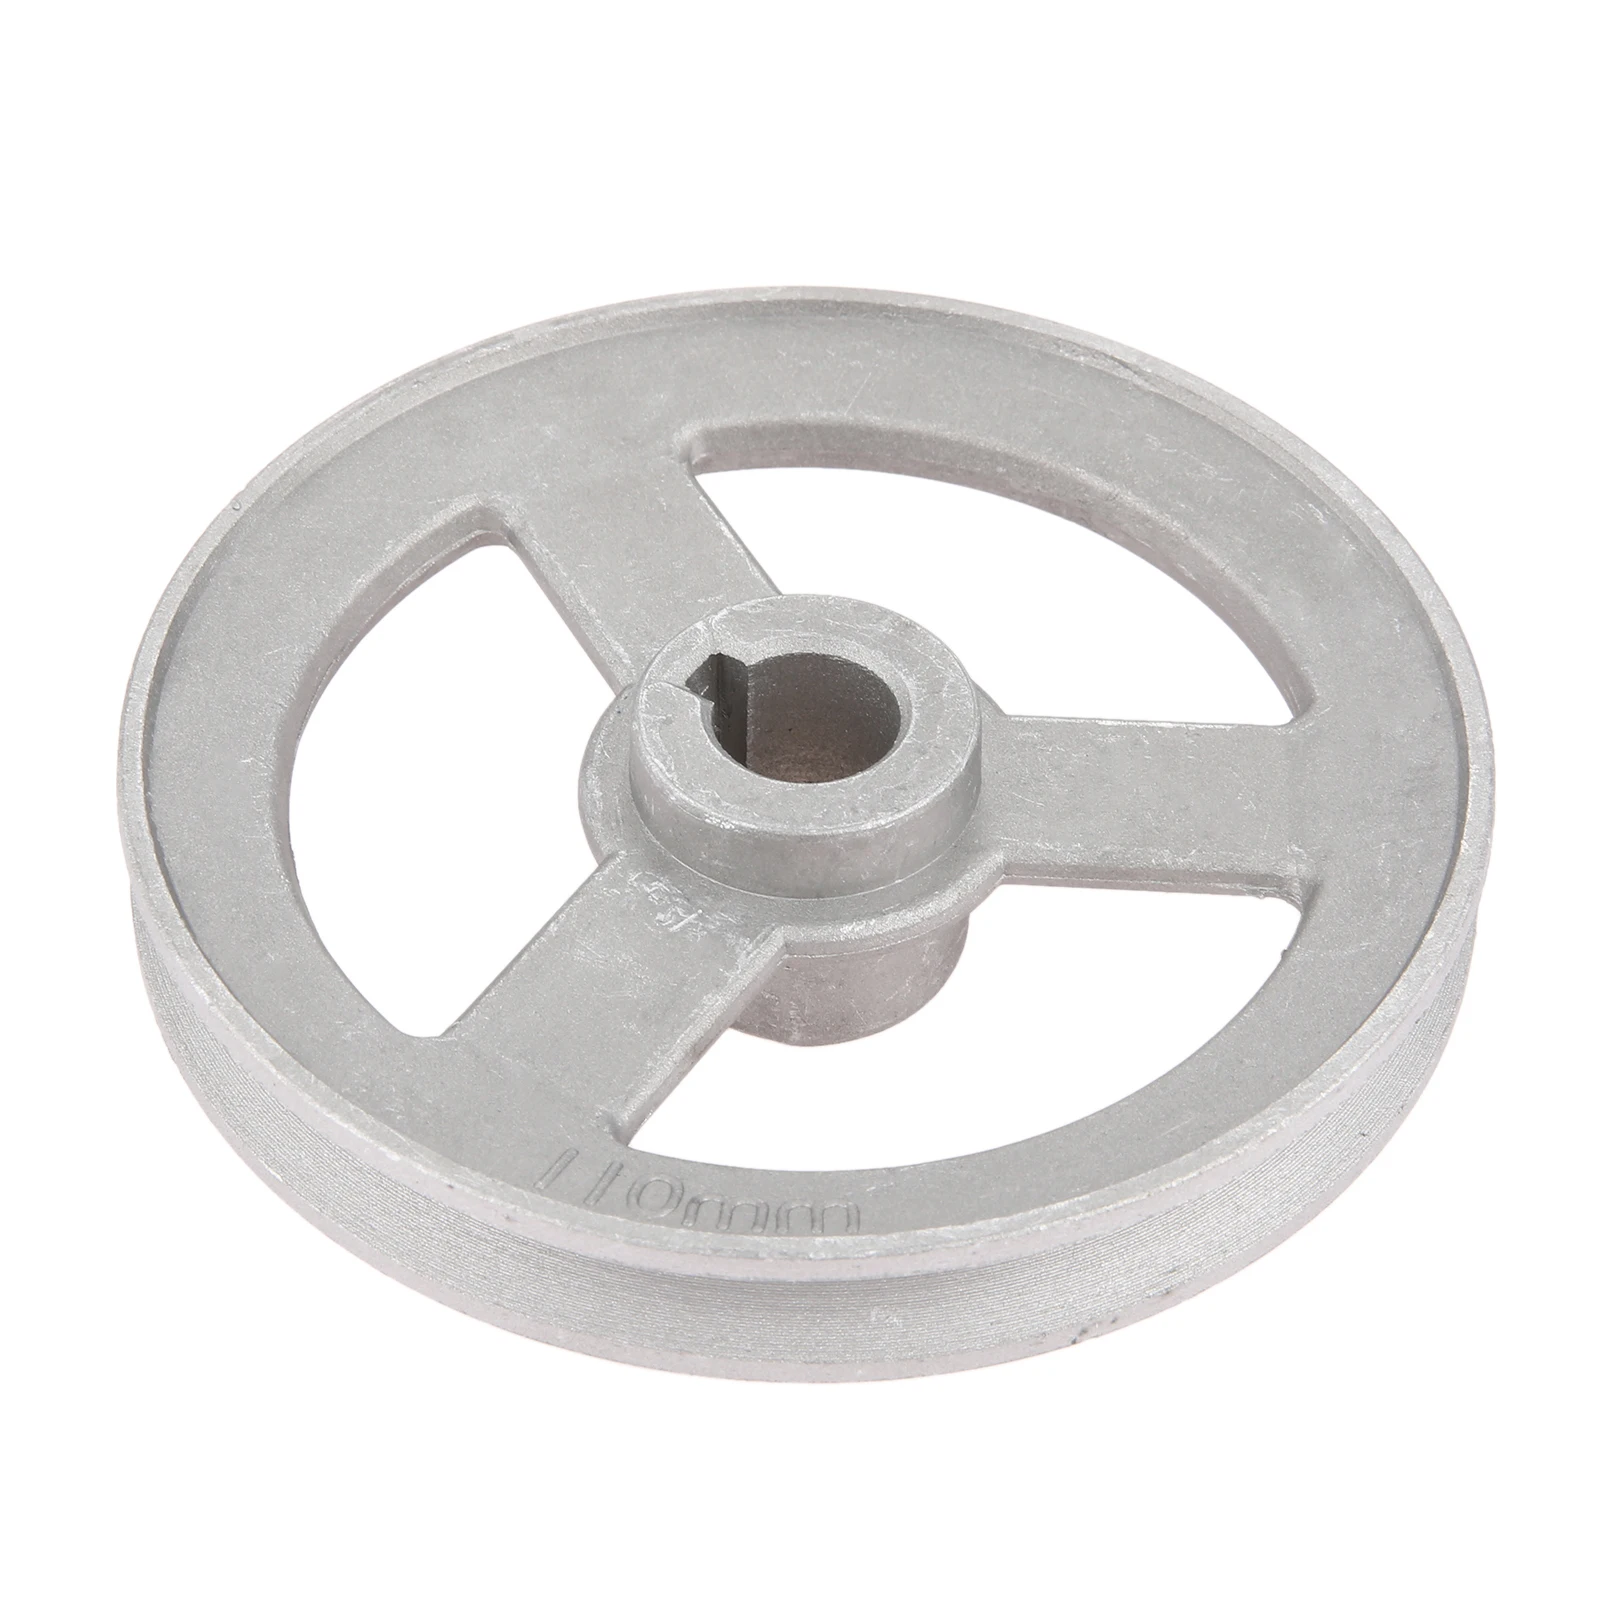 1Pc Aluminum Industrial Sewing Machine Timming Transfer Wheel Pulley Belt Motor Clutch Slow Speed Reducing Multi Size 45mm-120mm - Цвет: 110mm